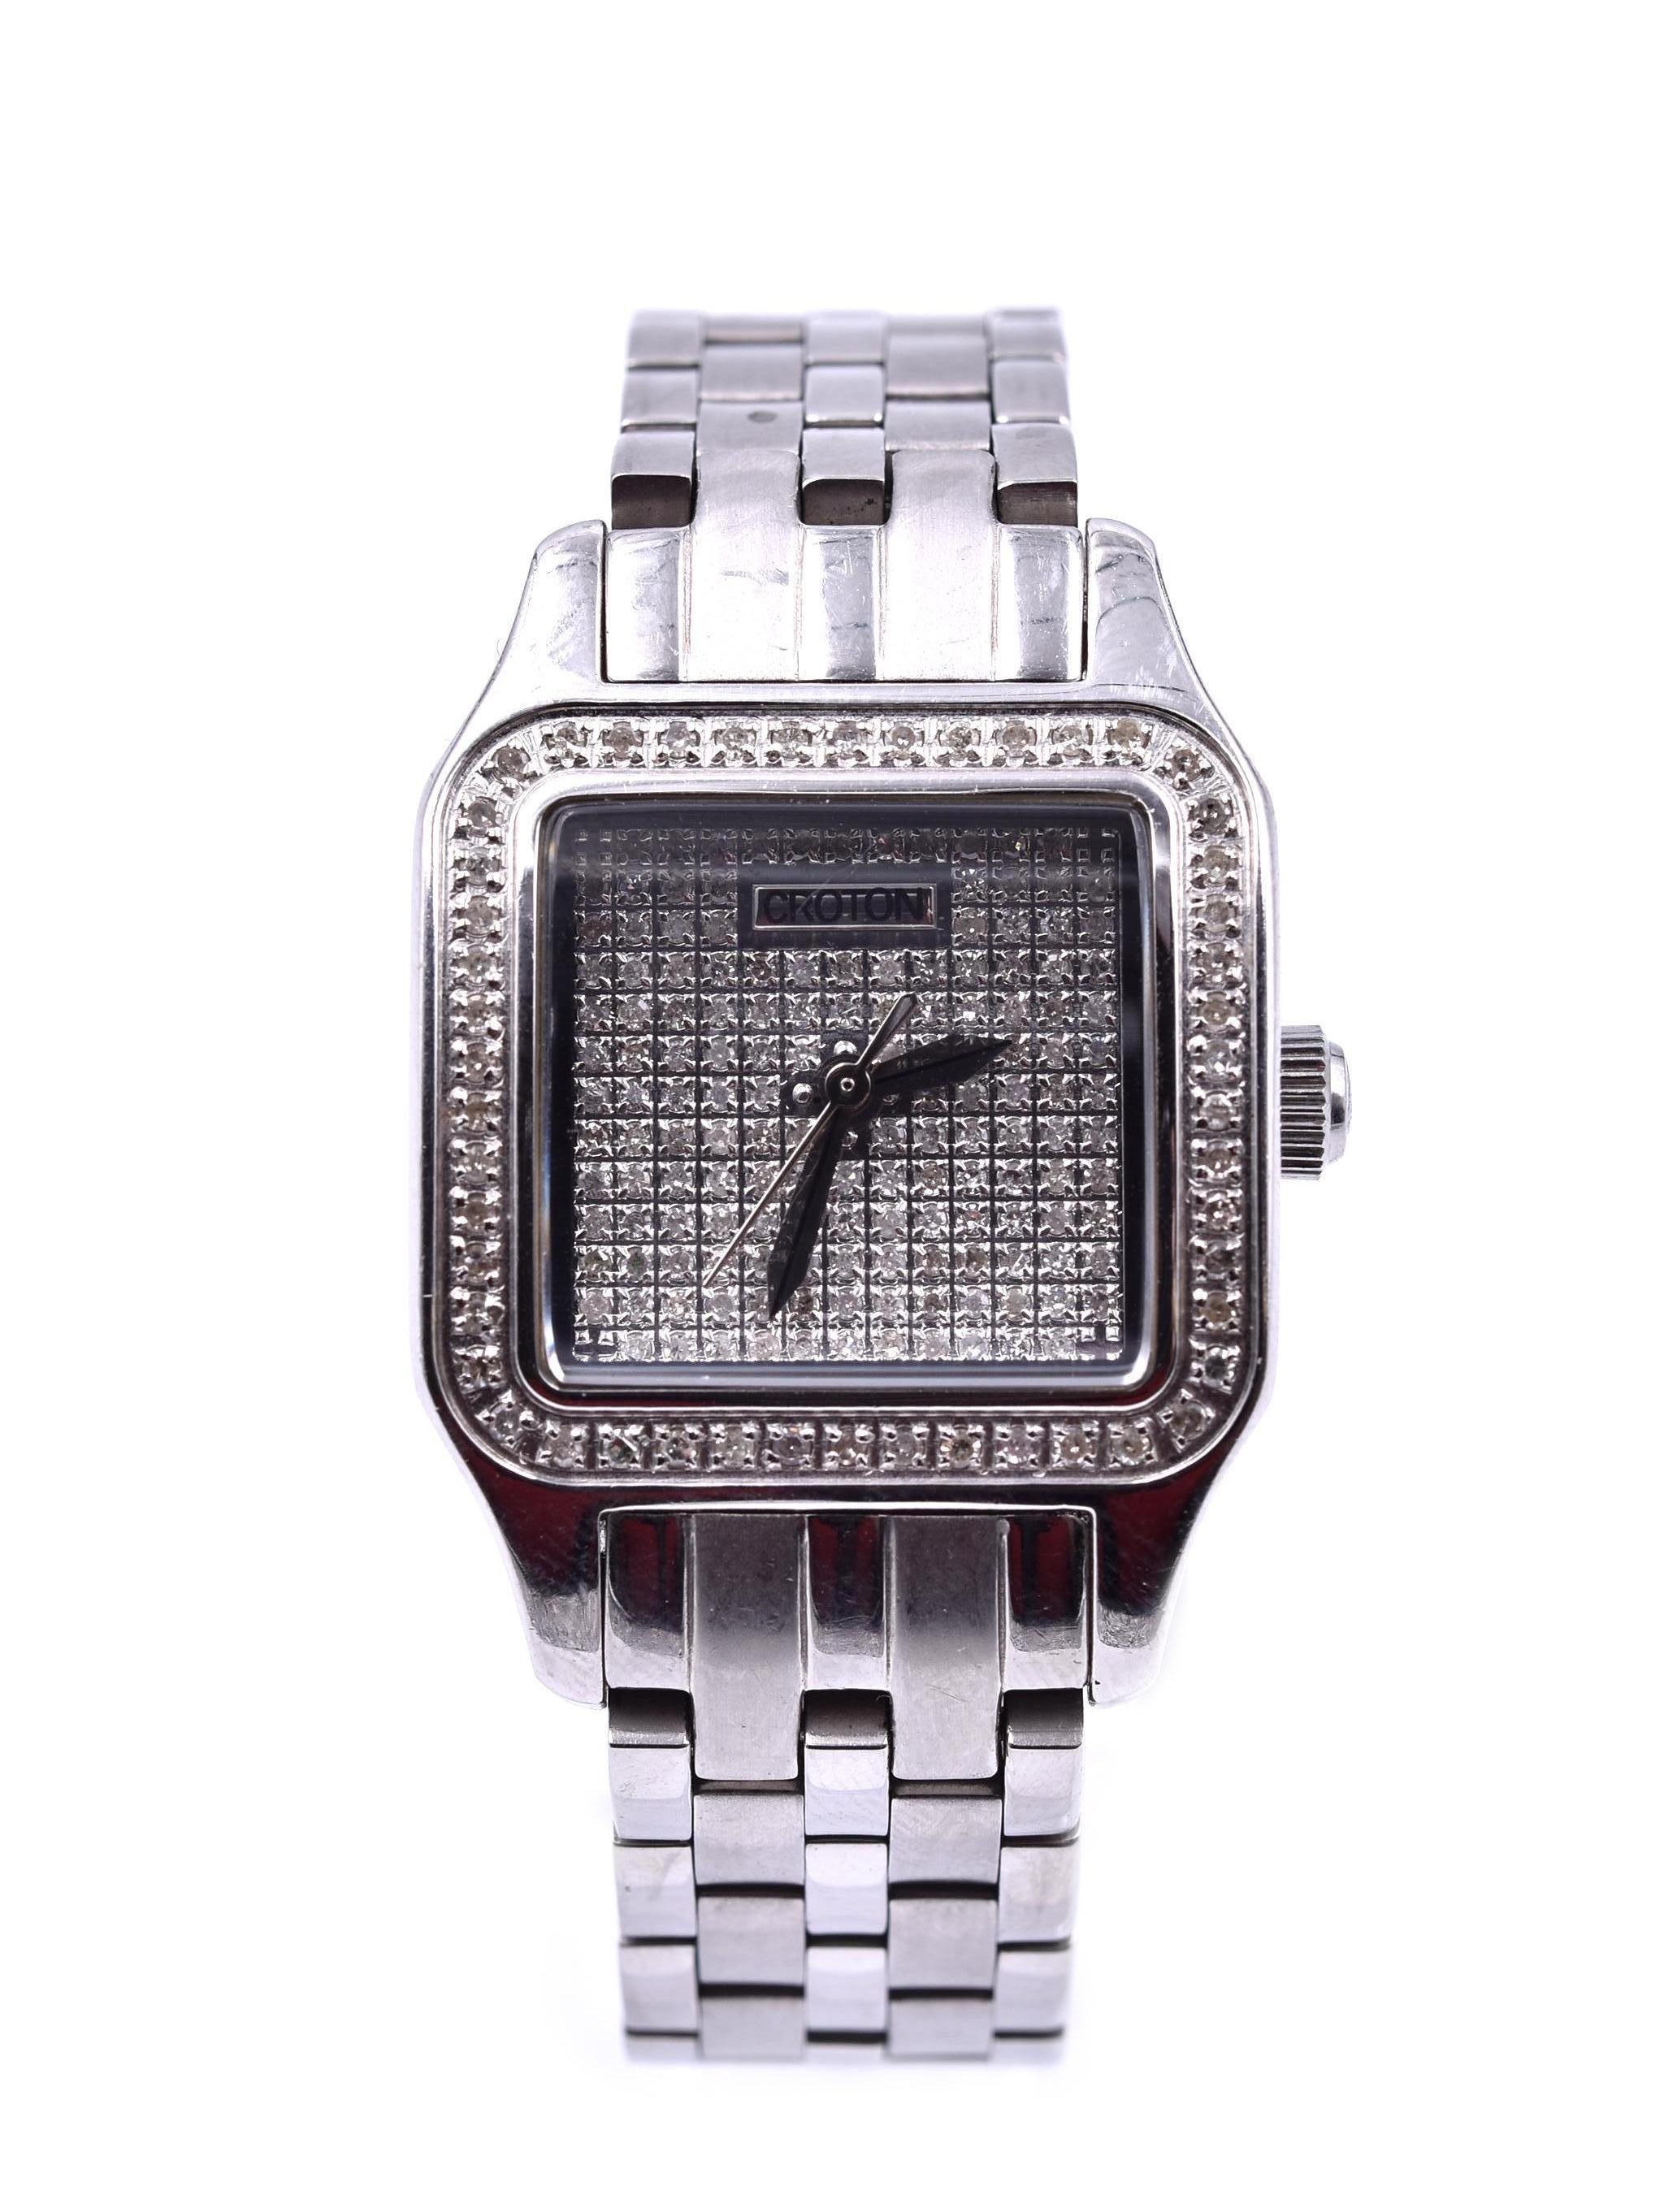 Movement: manual wind
Function: hour, minutes, seconds
Case: square 25mm steel case with genuine diamonds set in bezel & dial, sapphire protective crystal, stainless steel crown, water resistant to 30 meters 
Bracelet: stainless steel link bracelet